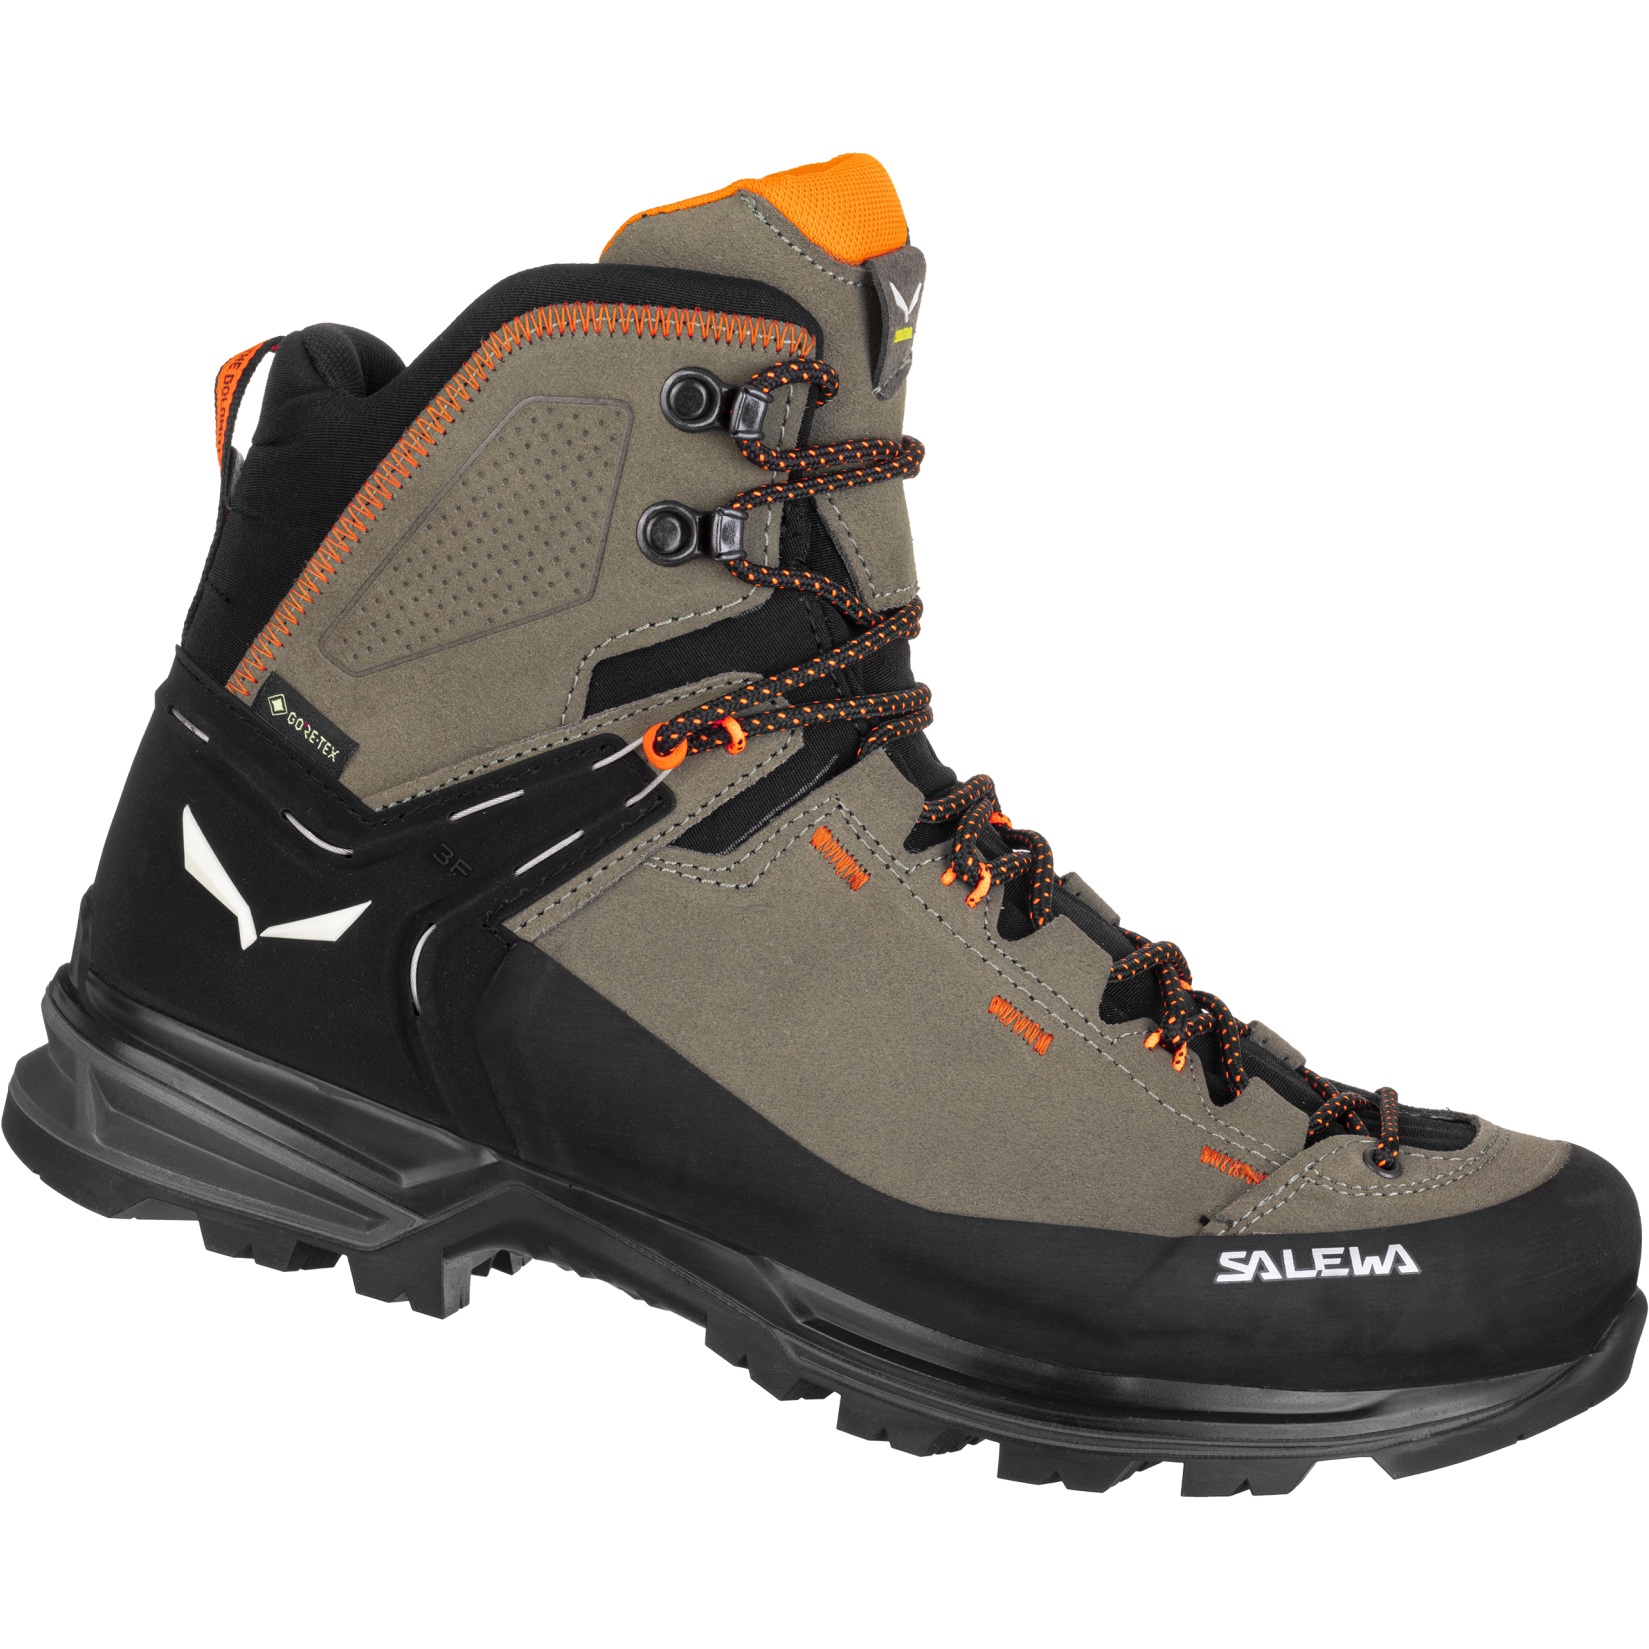 Image of Salewa Mountain Trainer 2 Mid GTX Approach Shoes - bungee cord/black 7953